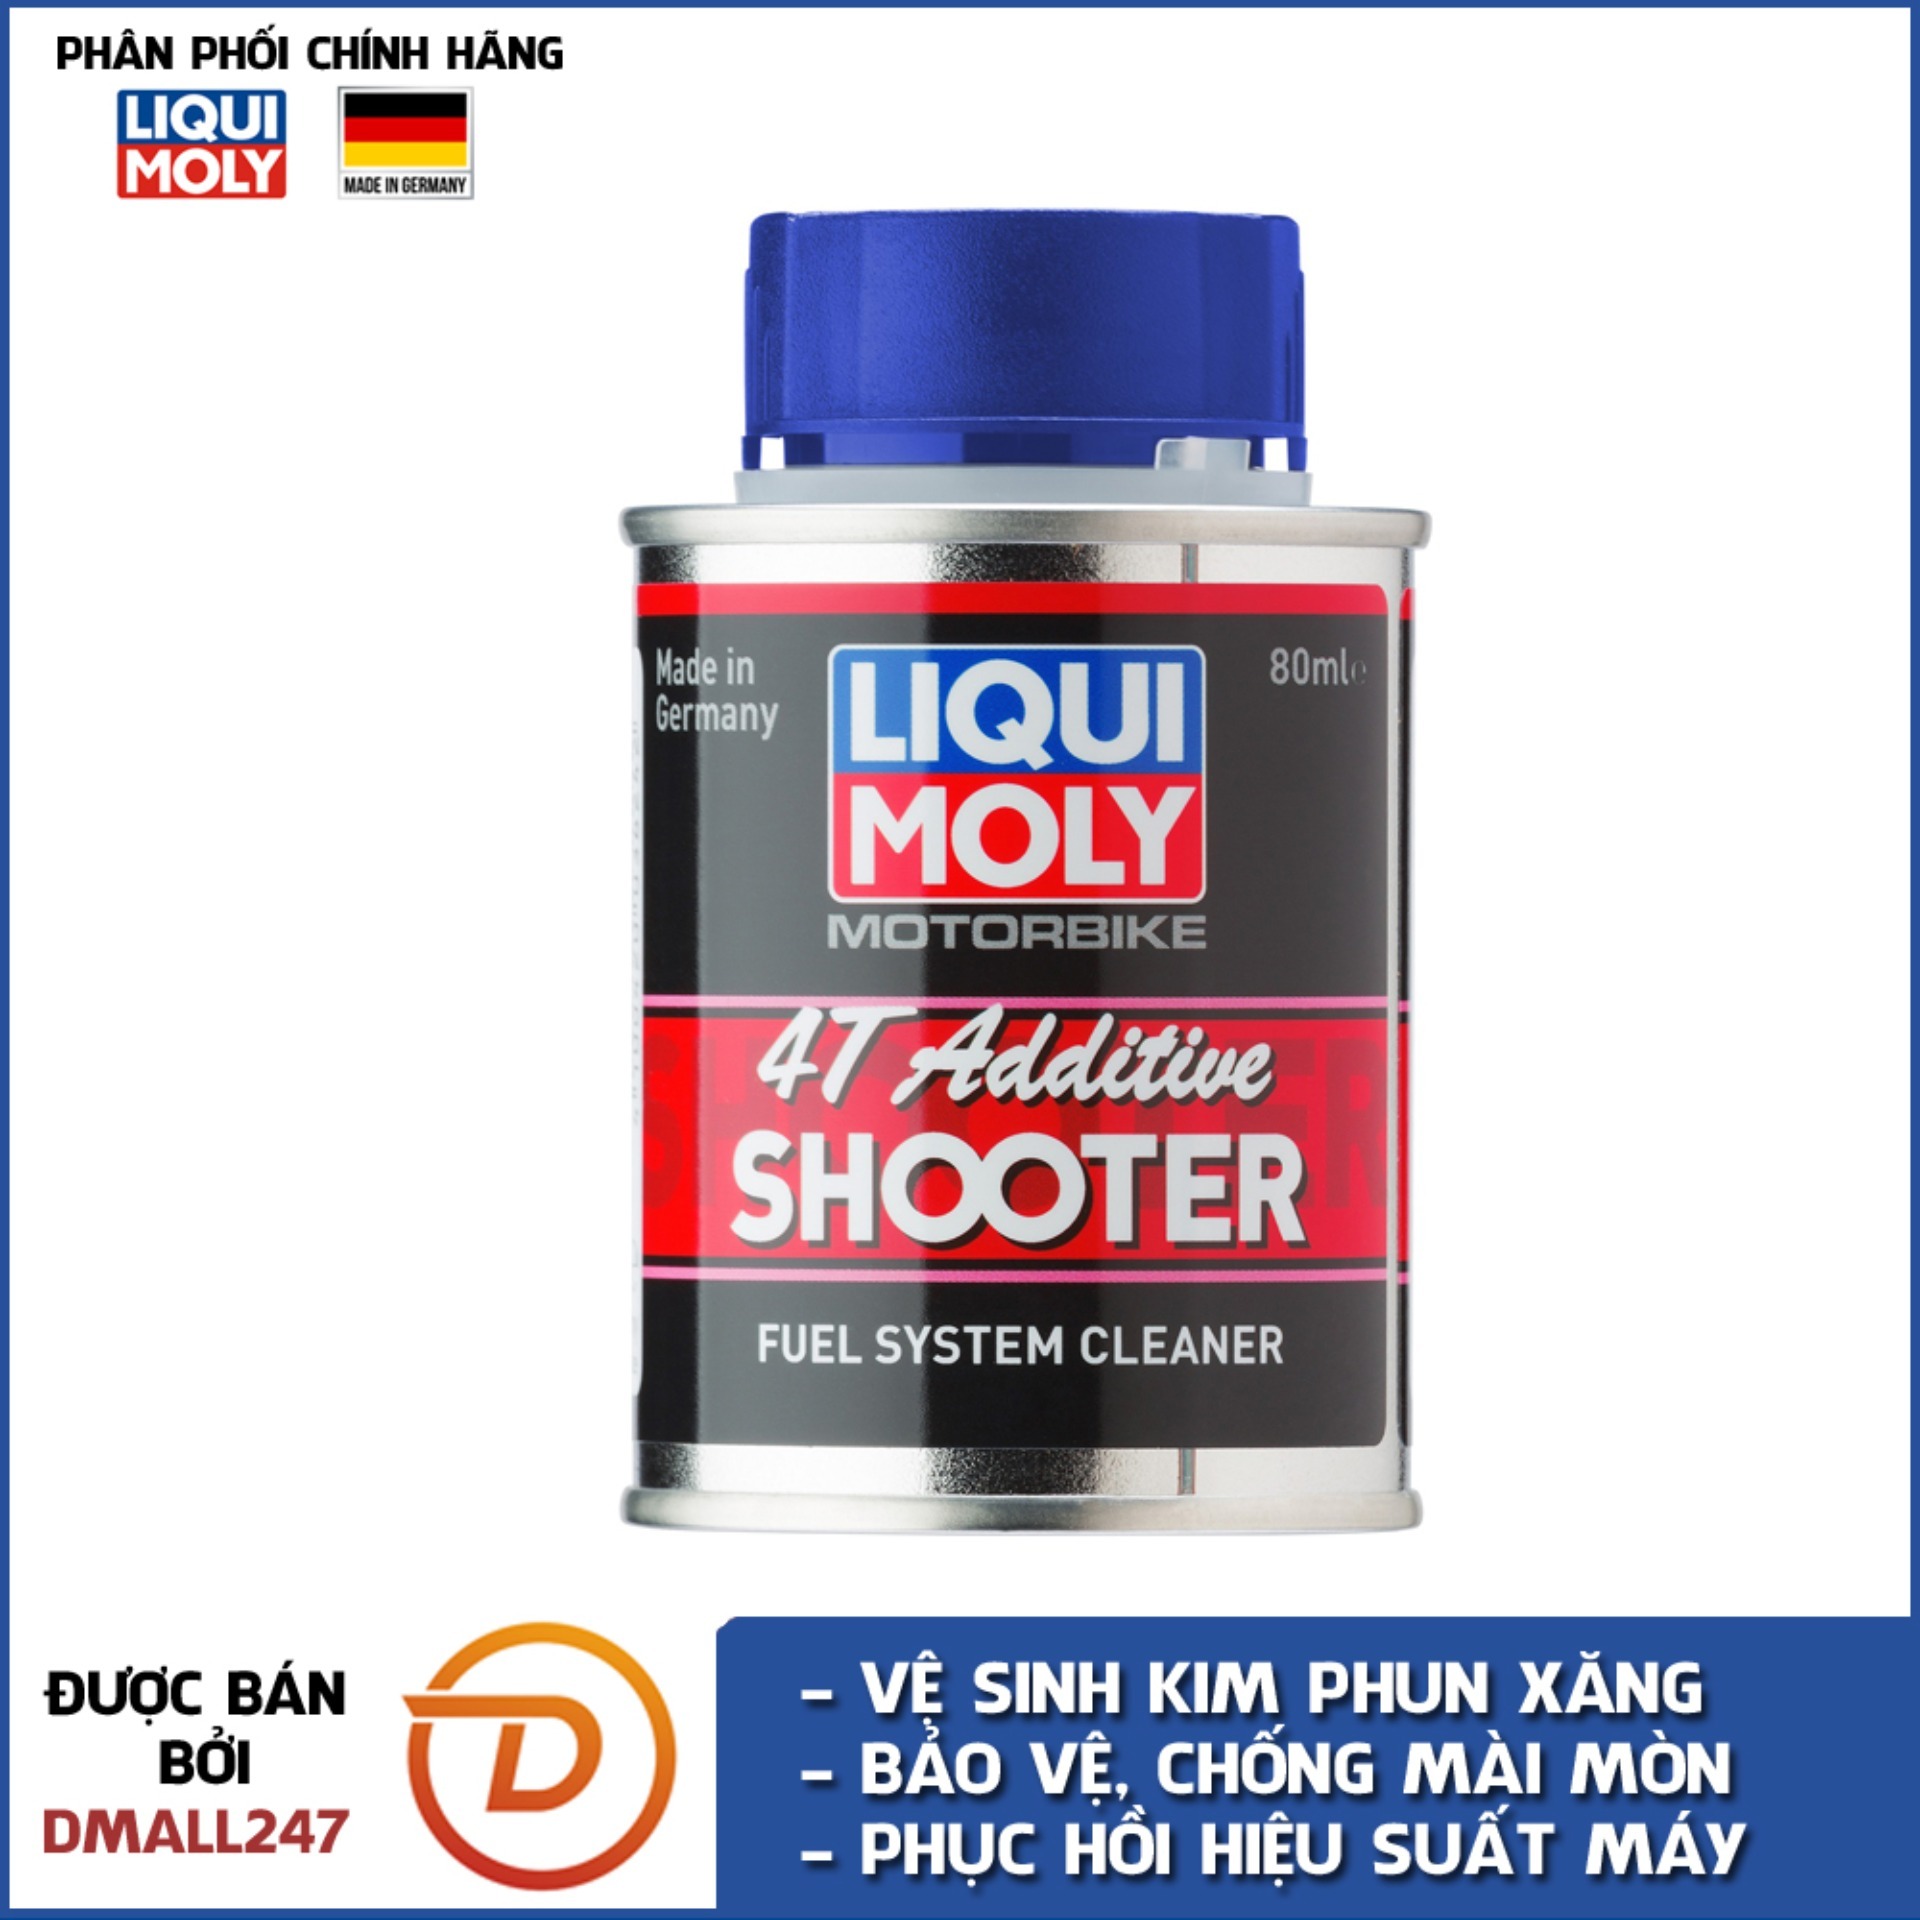 Dung dịch vệ sinh máy Carbon Cleaner Liqui Moly 4T Additive Shooter 7916 80ml